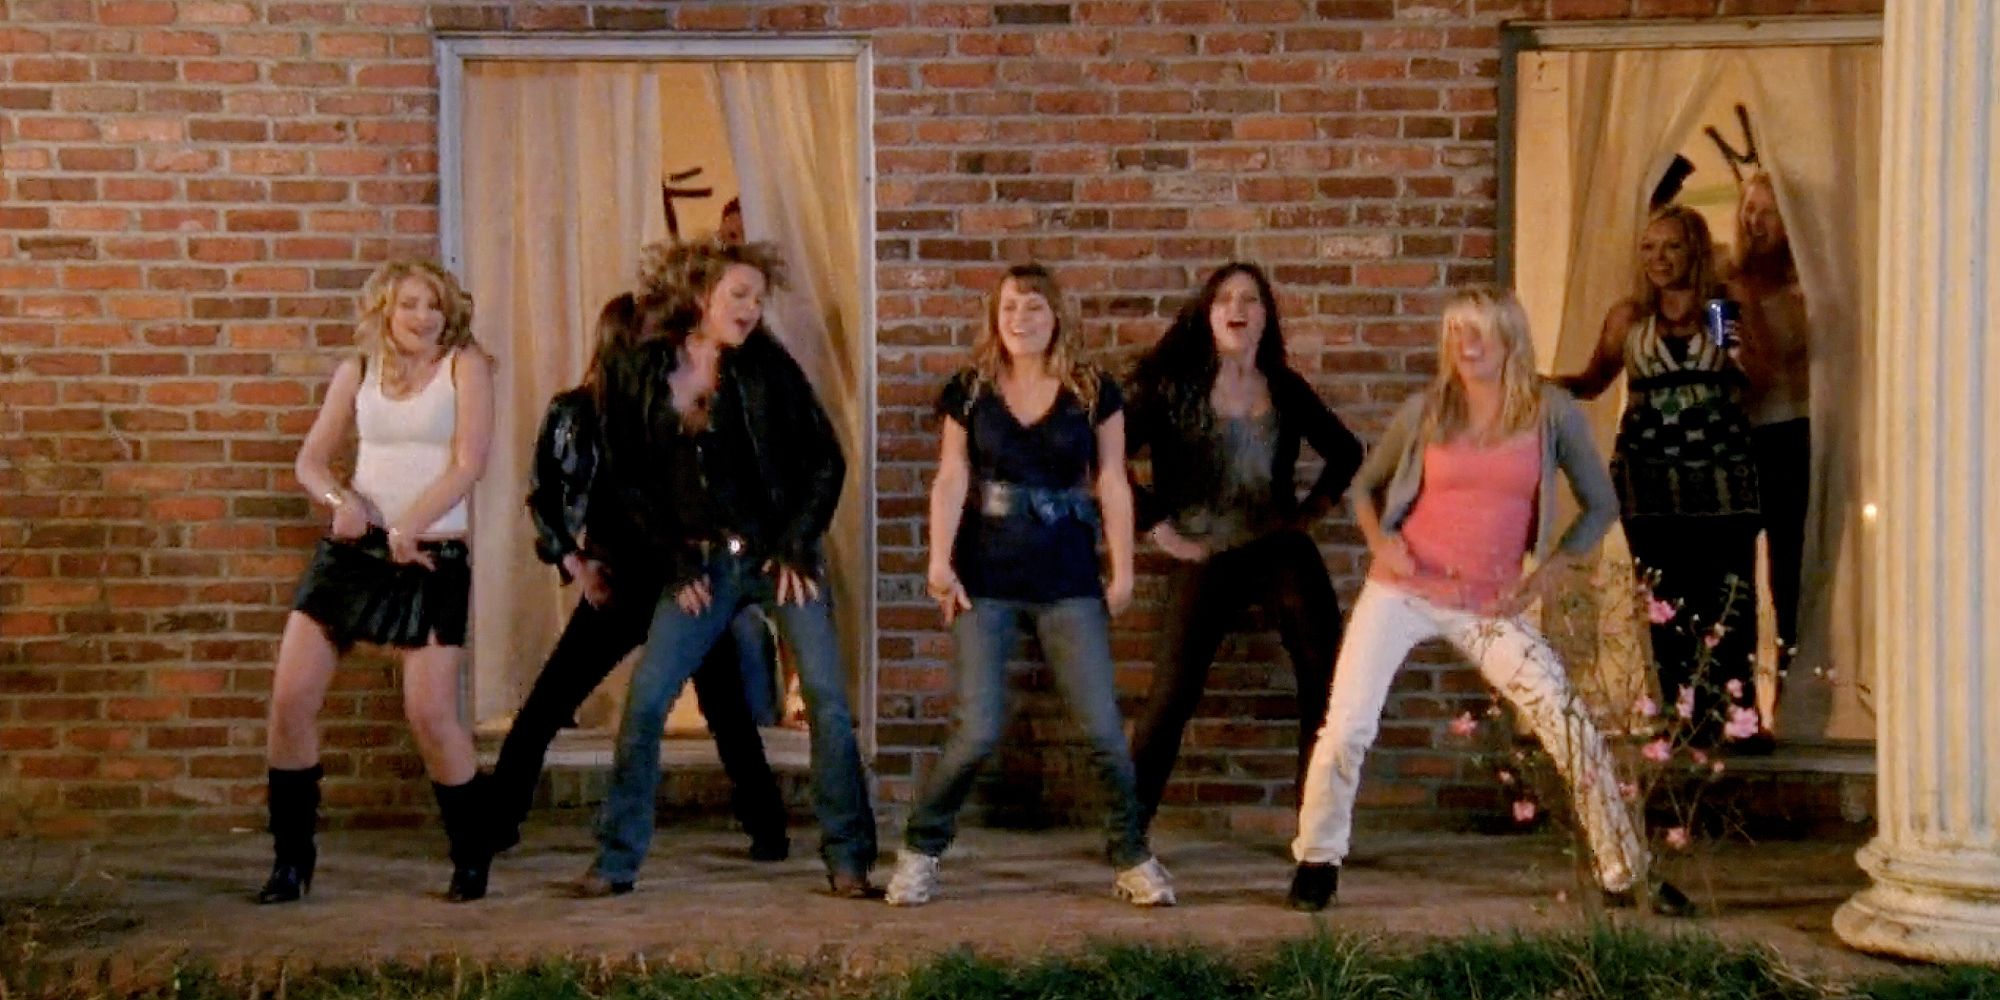 Girls of 'One Tree Hill' do the Spice Girls dance